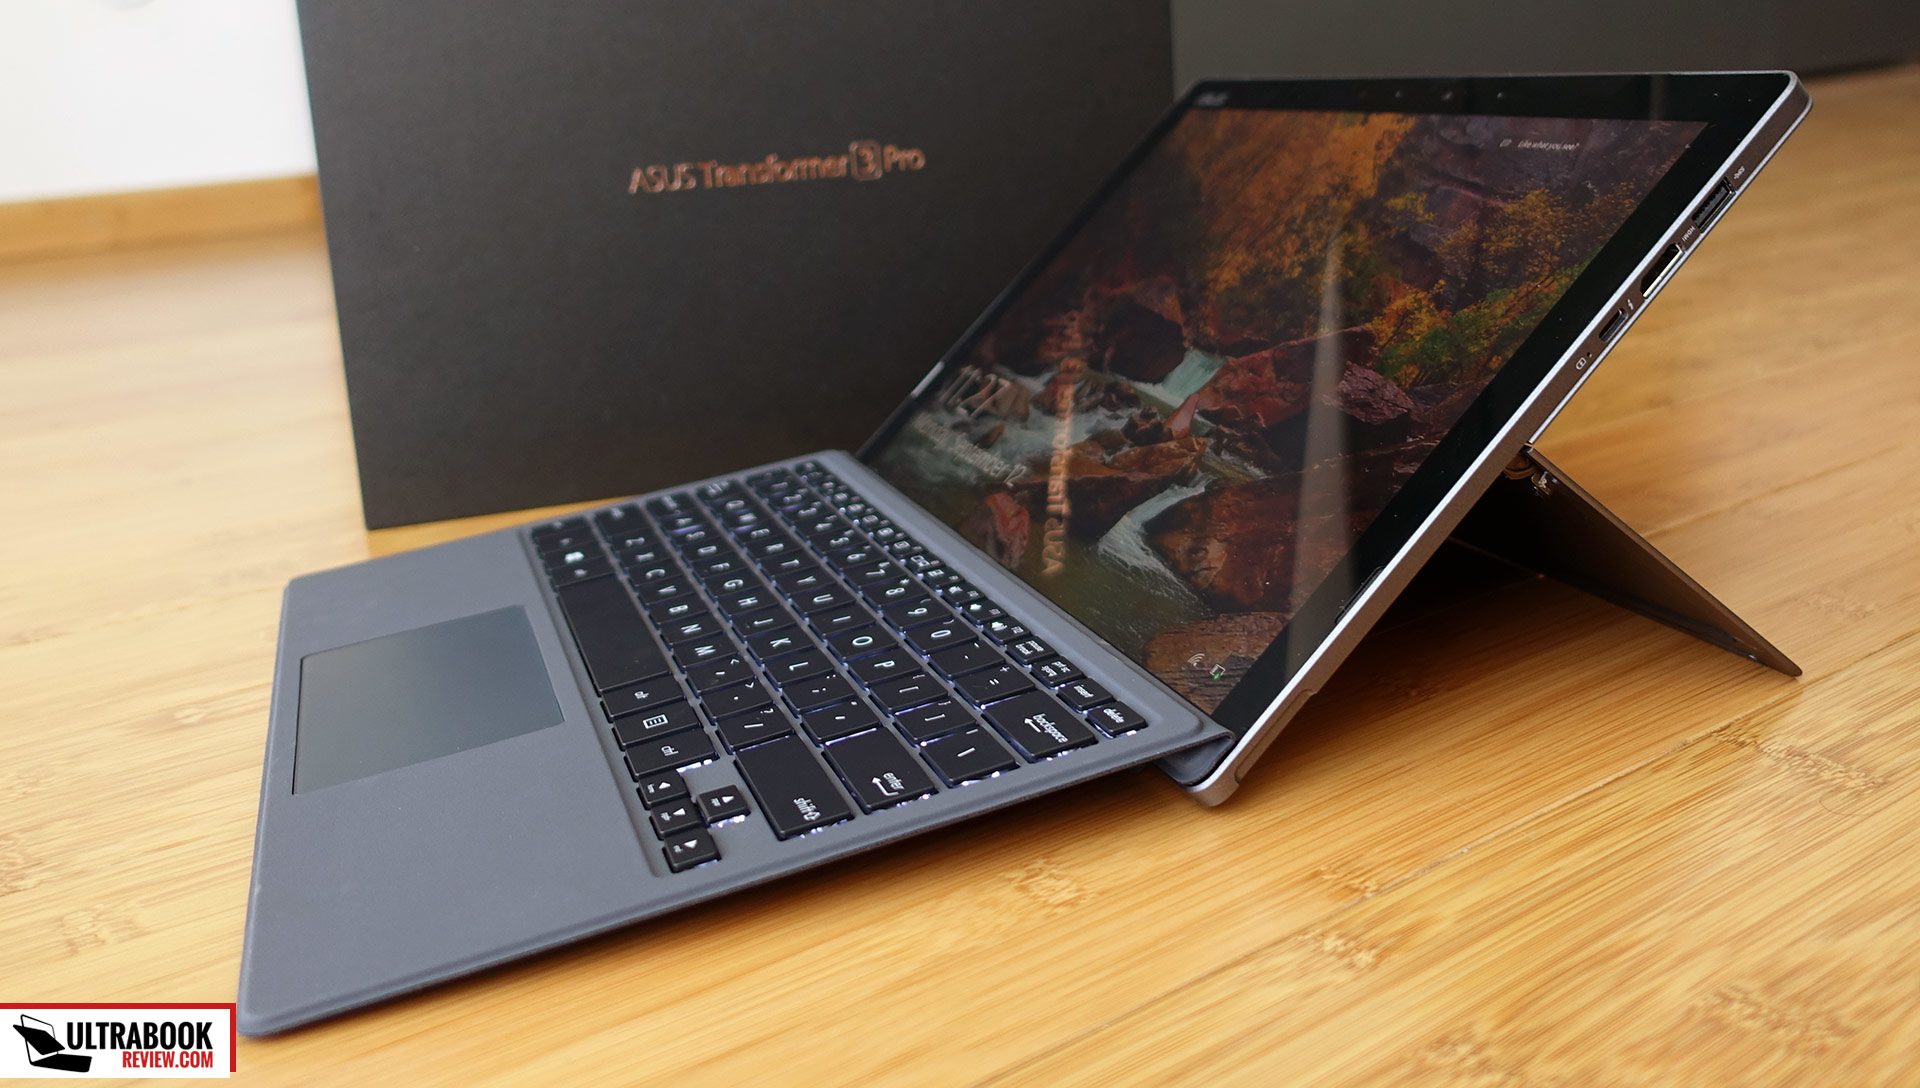 The Asus Transformer 3 Pro is one of the better hybrids of its kind